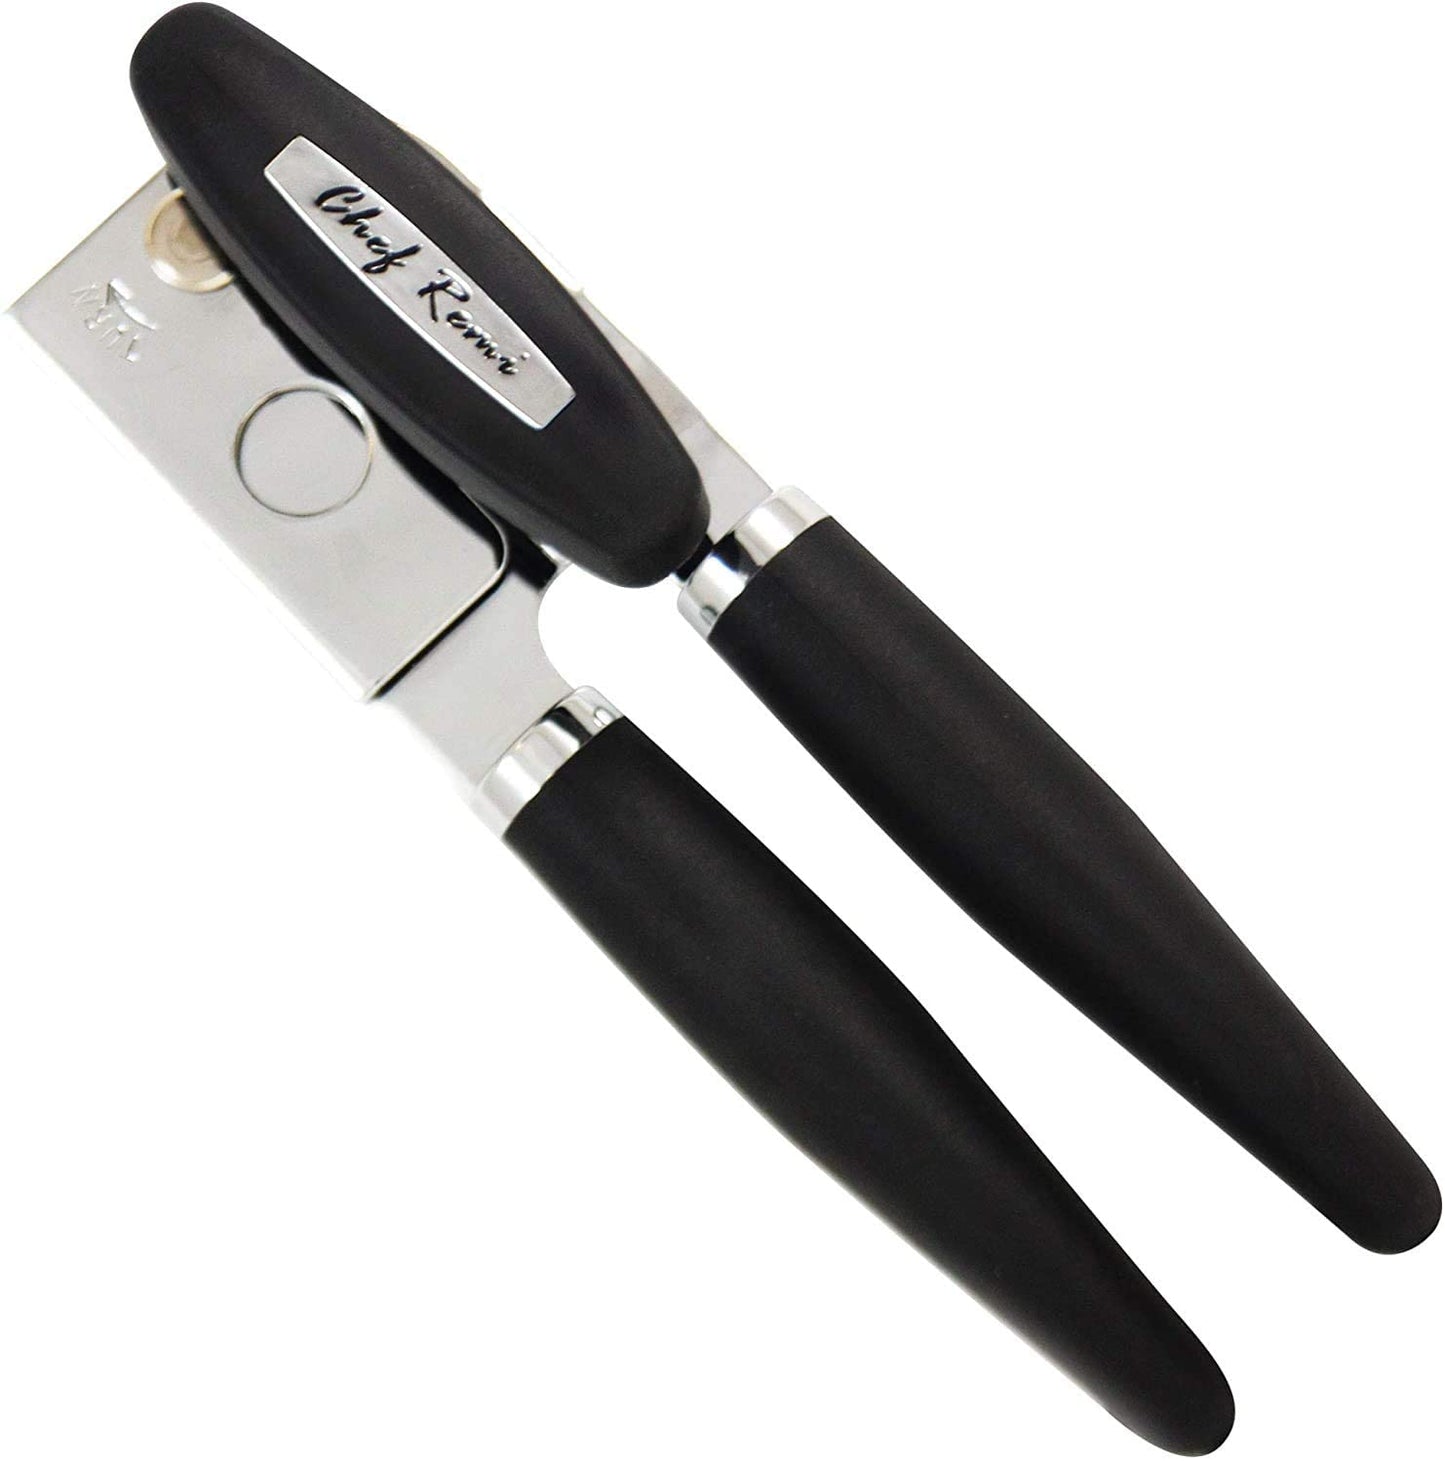 Chef Remi Tin Opener | Durable Can Opener with Non Slip, Comfortable Handles - Ideal for Elderly